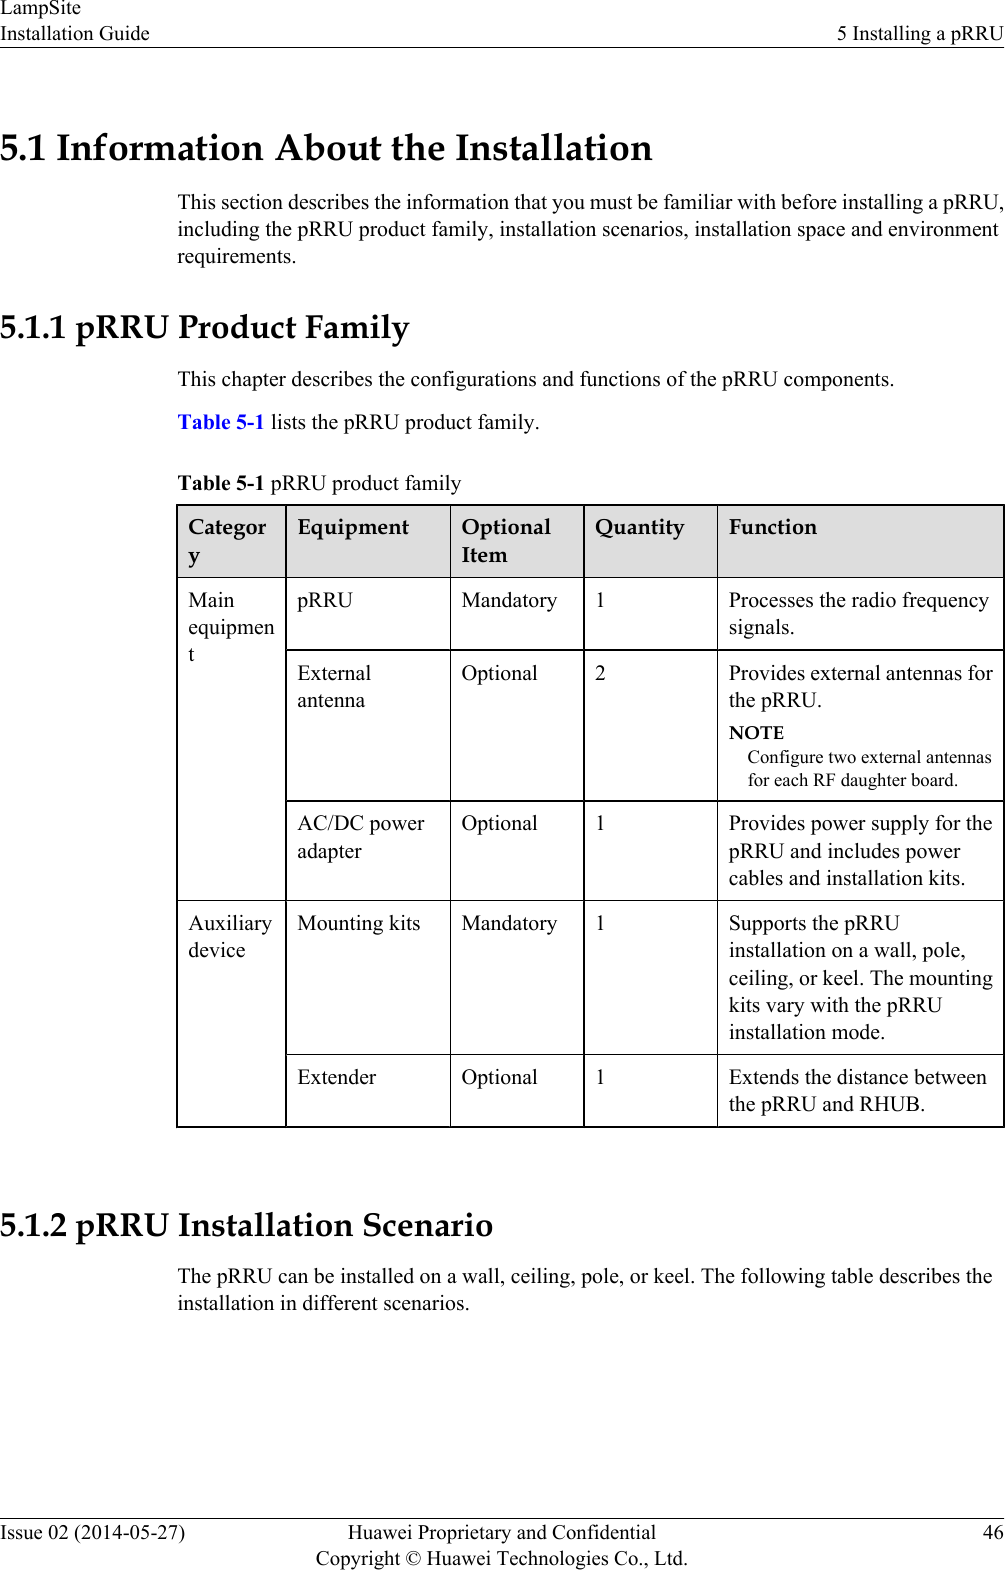 5.1 Information About the InstallationThis section describes the information that you must be familiar with before installing a pRRU,including the pRRU product family, installation scenarios, installation space and environmentrequirements.5.1.1 pRRU Product FamilyThis chapter describes the configurations and functions of the pRRU components.Table 5-1 lists the pRRU product family.Table 5-1 pRRU product familyCategoryEquipment OptionalItemQuantity FunctionMainequipmentpRRU Mandatory 1 Processes the radio frequencysignals.ExternalantennaOptional 2 Provides external antennas forthe pRRU.NOTEConfigure two external antennasfor each RF daughter board.AC/DC poweradapterOptional 1 Provides power supply for thepRRU and includes powercables and installation kits.AuxiliarydeviceMounting kits Mandatory 1 Supports the pRRUinstallation on a wall, pole,ceiling, or keel. The mountingkits vary with the pRRUinstallation mode.Extender Optional 1 Extends the distance betweenthe pRRU and RHUB. 5.1.2 pRRU Installation ScenarioThe pRRU can be installed on a wall, ceiling, pole, or keel. The following table describes theinstallation in different scenarios.LampSiteInstallation Guide 5 Installing a pRRUIssue 02 (2014-05-27) Huawei Proprietary and ConfidentialCopyright © Huawei Technologies Co., Ltd.46